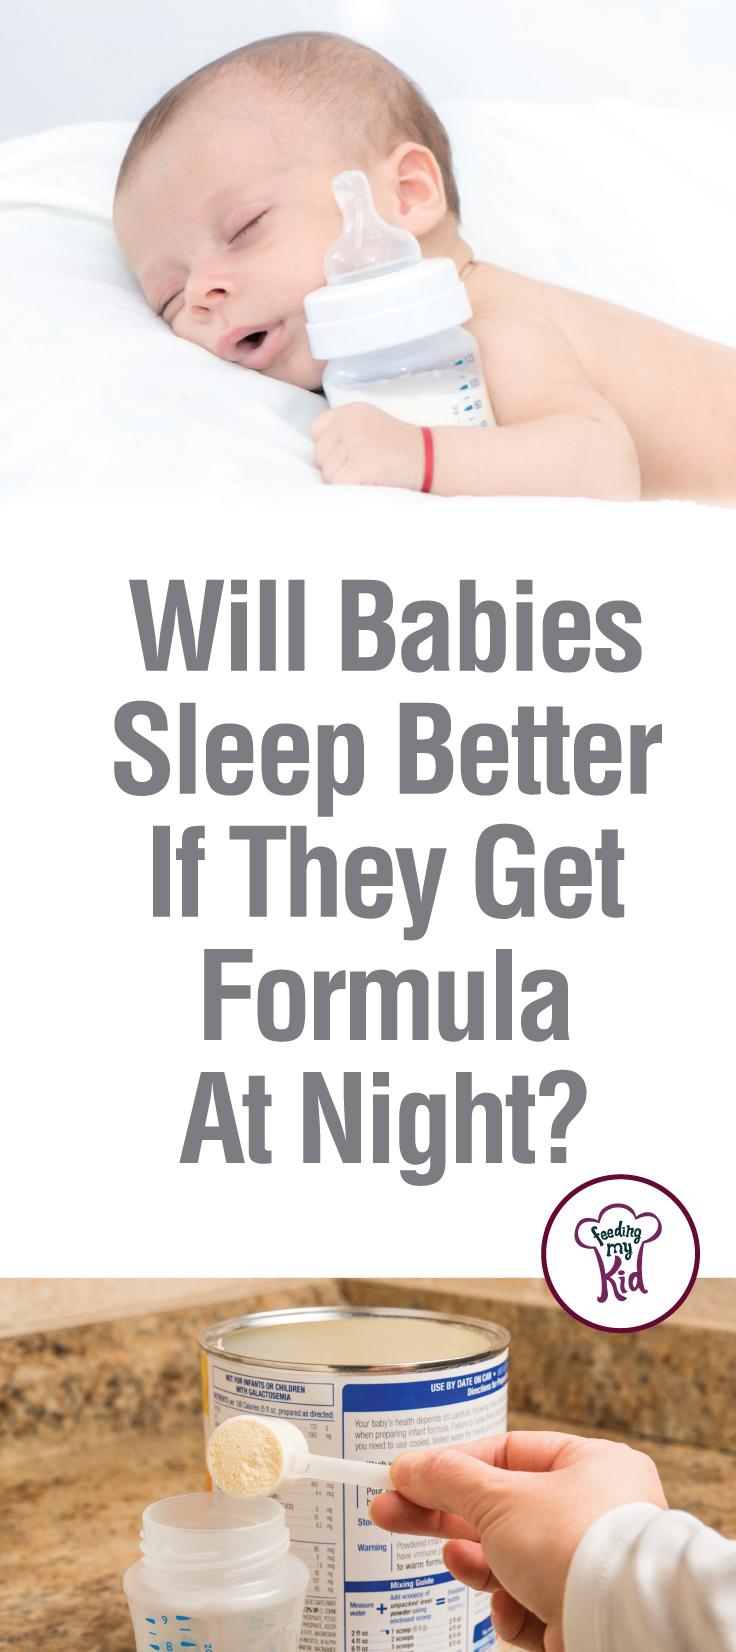 Do Babies Sleep Better with Formula? Find out if formula will help your baby sleep longer at night.